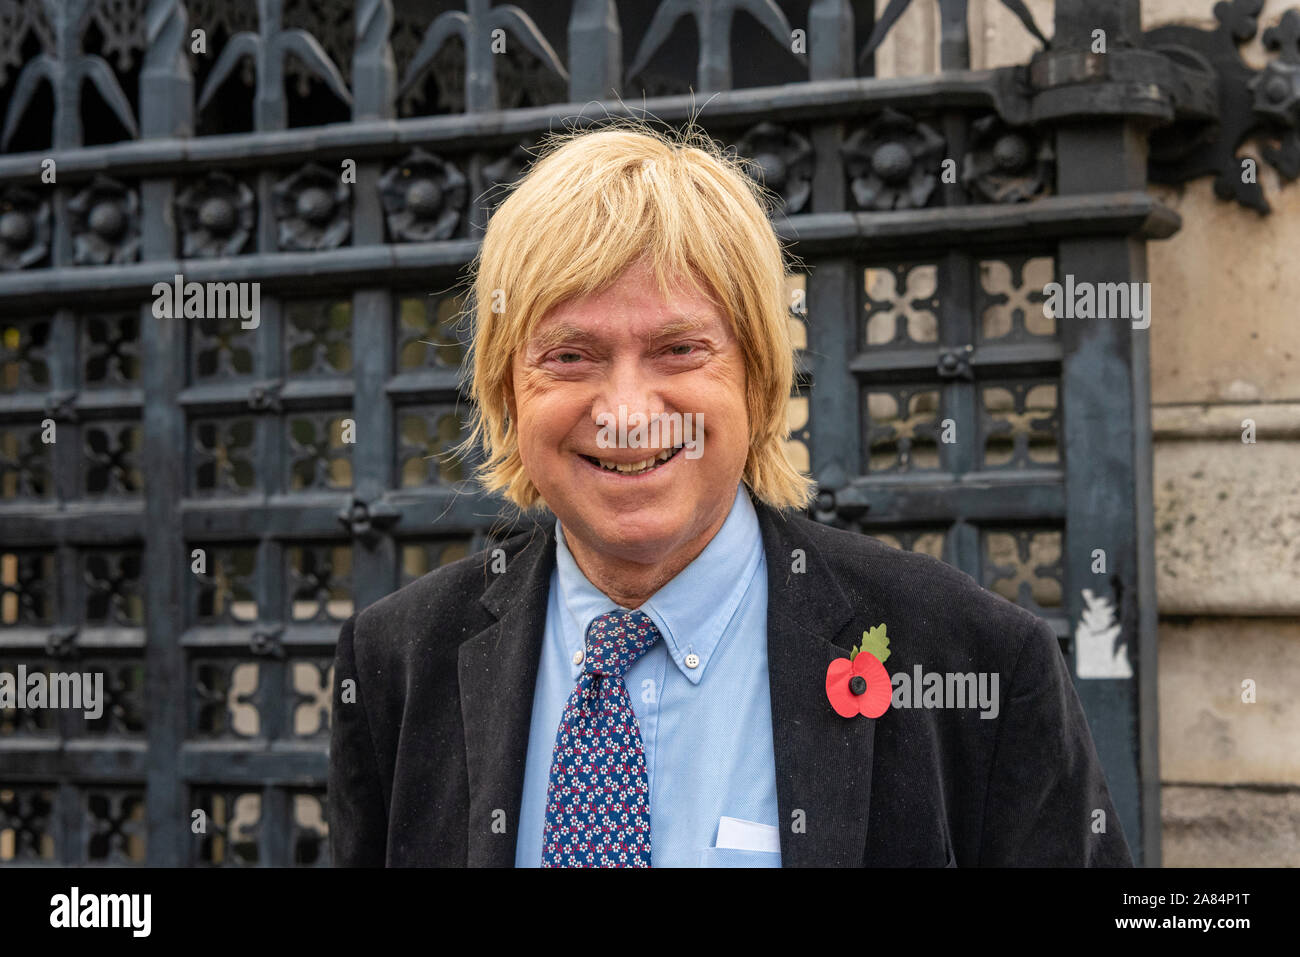 Michael Fabricant MP arriving at House of Commons for their last day of debates before Parliament is dissolved in preparation for the general election Stock Photo